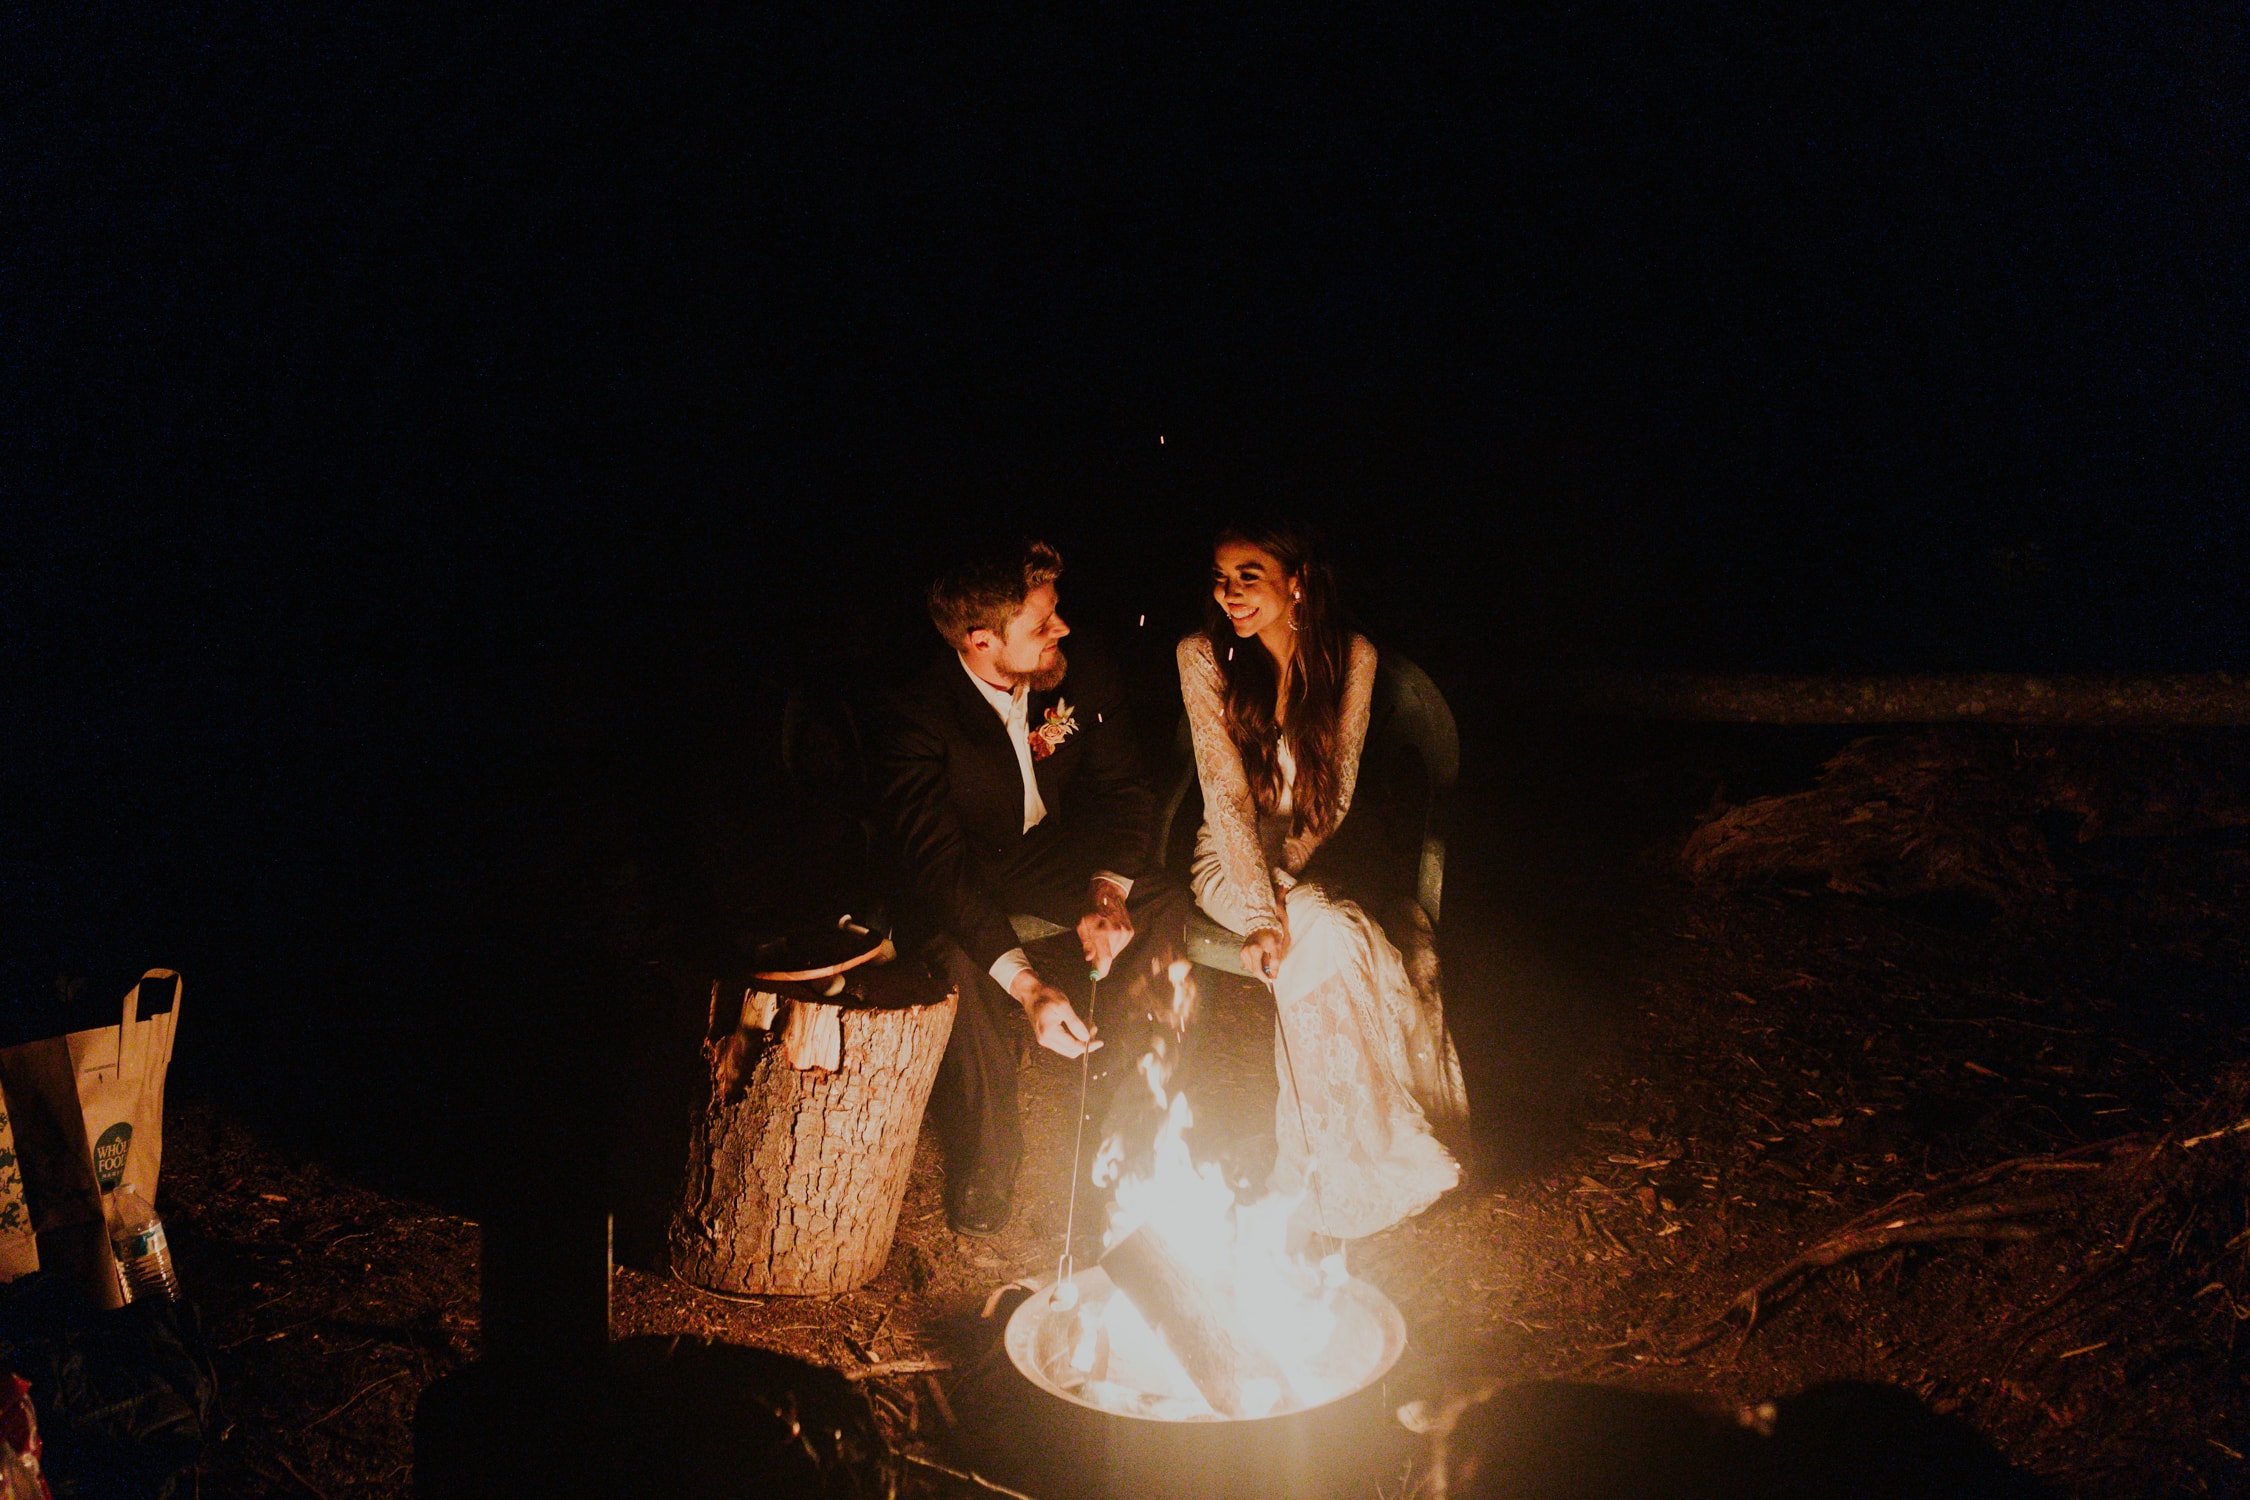 A bride and groom roasting marshmallows on a fire on their elopement day.